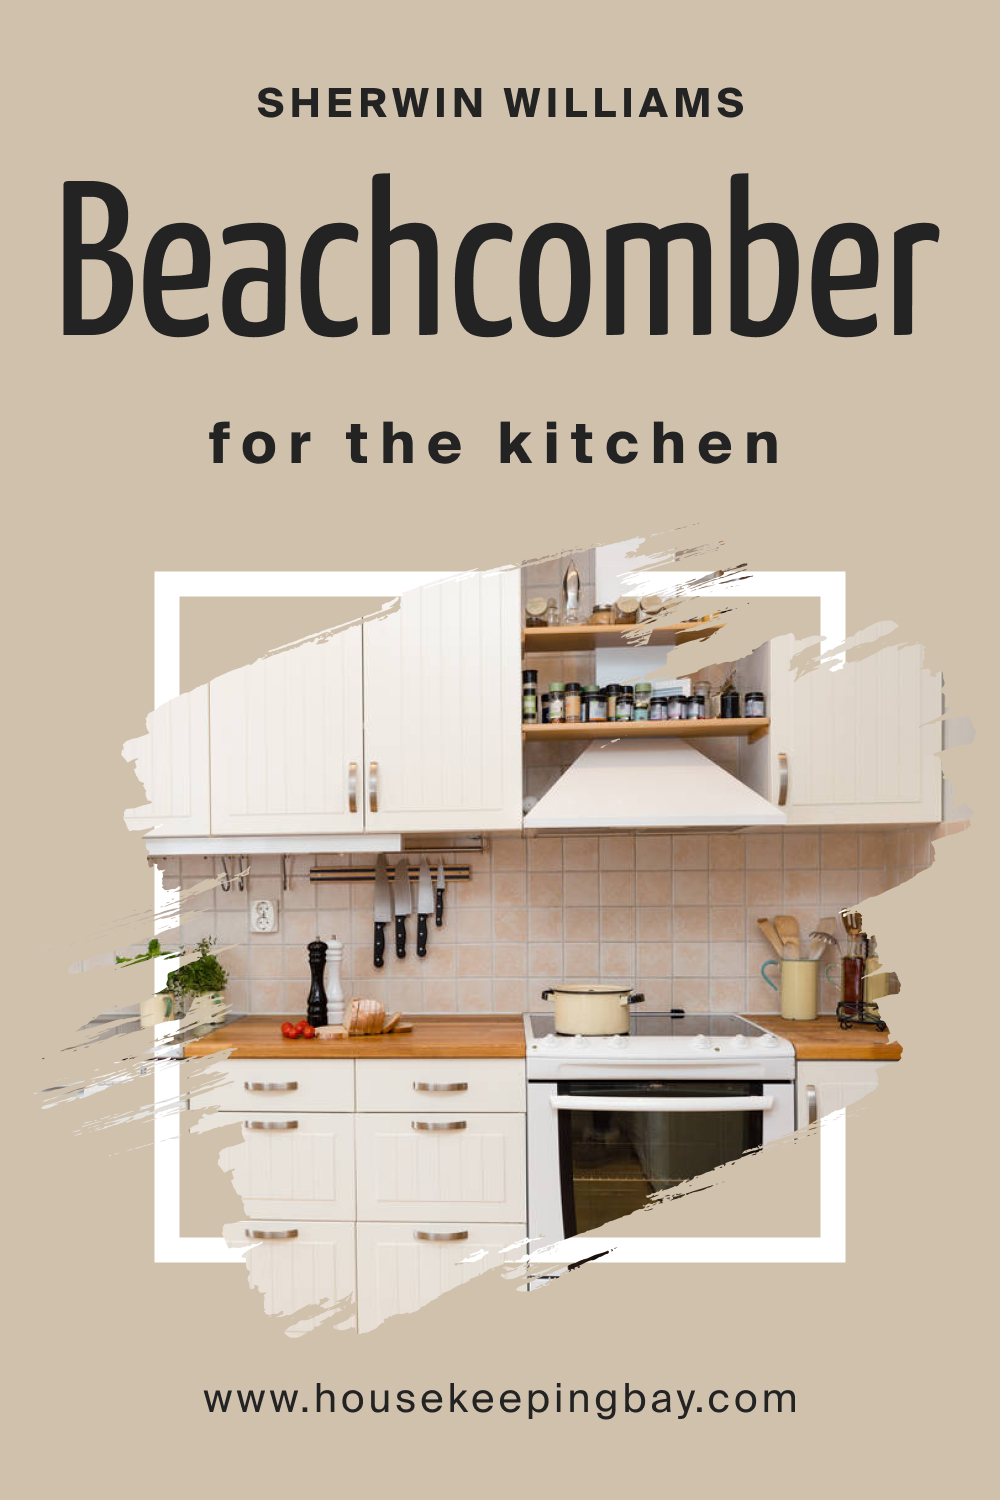 Sherwin Williams. SW 9617 Beachcomber For the Kitchens